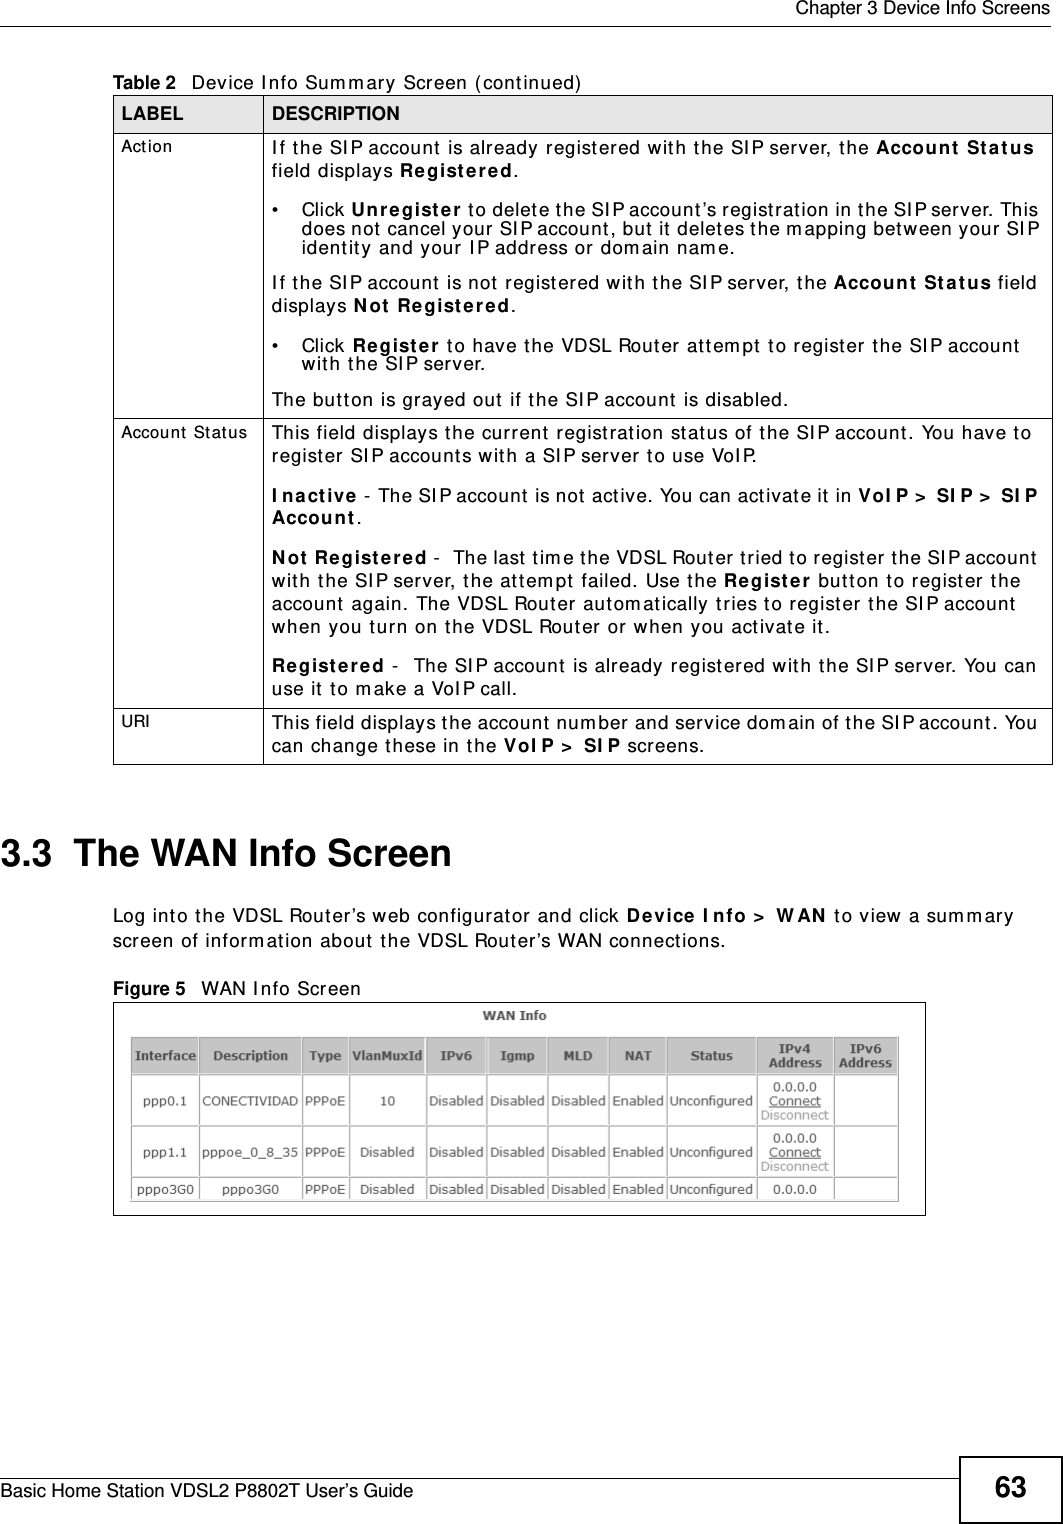  Chapter 3 Device Info ScreensBasic Home Station VDSL2 P8802T User’s Guide 633.3  The WAN Info ScreenLog int o the VDSL Router’s web configurat or and click Device I nfo &gt;  W AN  t o view a sum mary screen of inform at ion about t he VDSL Rout er’s WAN connections.Figure 5   WAN I nfo ScreenAct ion I f t he SI P account is already regist ered wit h the SI P server, the Accou nt  St a t us field displays Re gist e r ed .• Click Un r egist e r  to delet e t he SI P account ’s regist rat ion in t he SI P server. This does not cancel your SI P account, but it  delet es the m apping between your SI P ident ity and your I P address or dom ain nam e.I f t he SI P account is not regist ered w it h t he SI P ser ver, t he Account  St atus field displays N ot  Re gist e r ed .• Click Re gist e r  t o have the VDSL Rout er at tem pt to regist er the SI P account with t he SI P server.The button is grayed out if the SI P account is disabled.Account St at us This field displays t he current  regist rat ion st at us of t he SI P account. You have to regist er SI P accounts with a SI P server t o use VoI P.I n act ive  -  The SI P account is not act ive. You can act ivate it in VoI P &gt;  SI P &gt;  SI P Accou nt .N ot Registered -   The last  tim e t he VDSL Router tried t o regist er t he SI P account with t he SI P server, the att em pt  failed. Use t he Regist er button to regist er the account  again. The VDSL Router aut om at ically tries t o regist er t he SI P account when you turn on the VDSL Router or when you act ivat e it.Regist e r ed -   The SI P account  is already regist ered with t he SI P server. You can use it to m ake a VoI P call.URI This field displays t he account  num ber and service dom ain of the SI P account. You can change t hese in t he VoI P &gt;  SI P screens.Table 2   Device I nfo Sum m ary Screen ( continued)LABEL DESCRIPTION